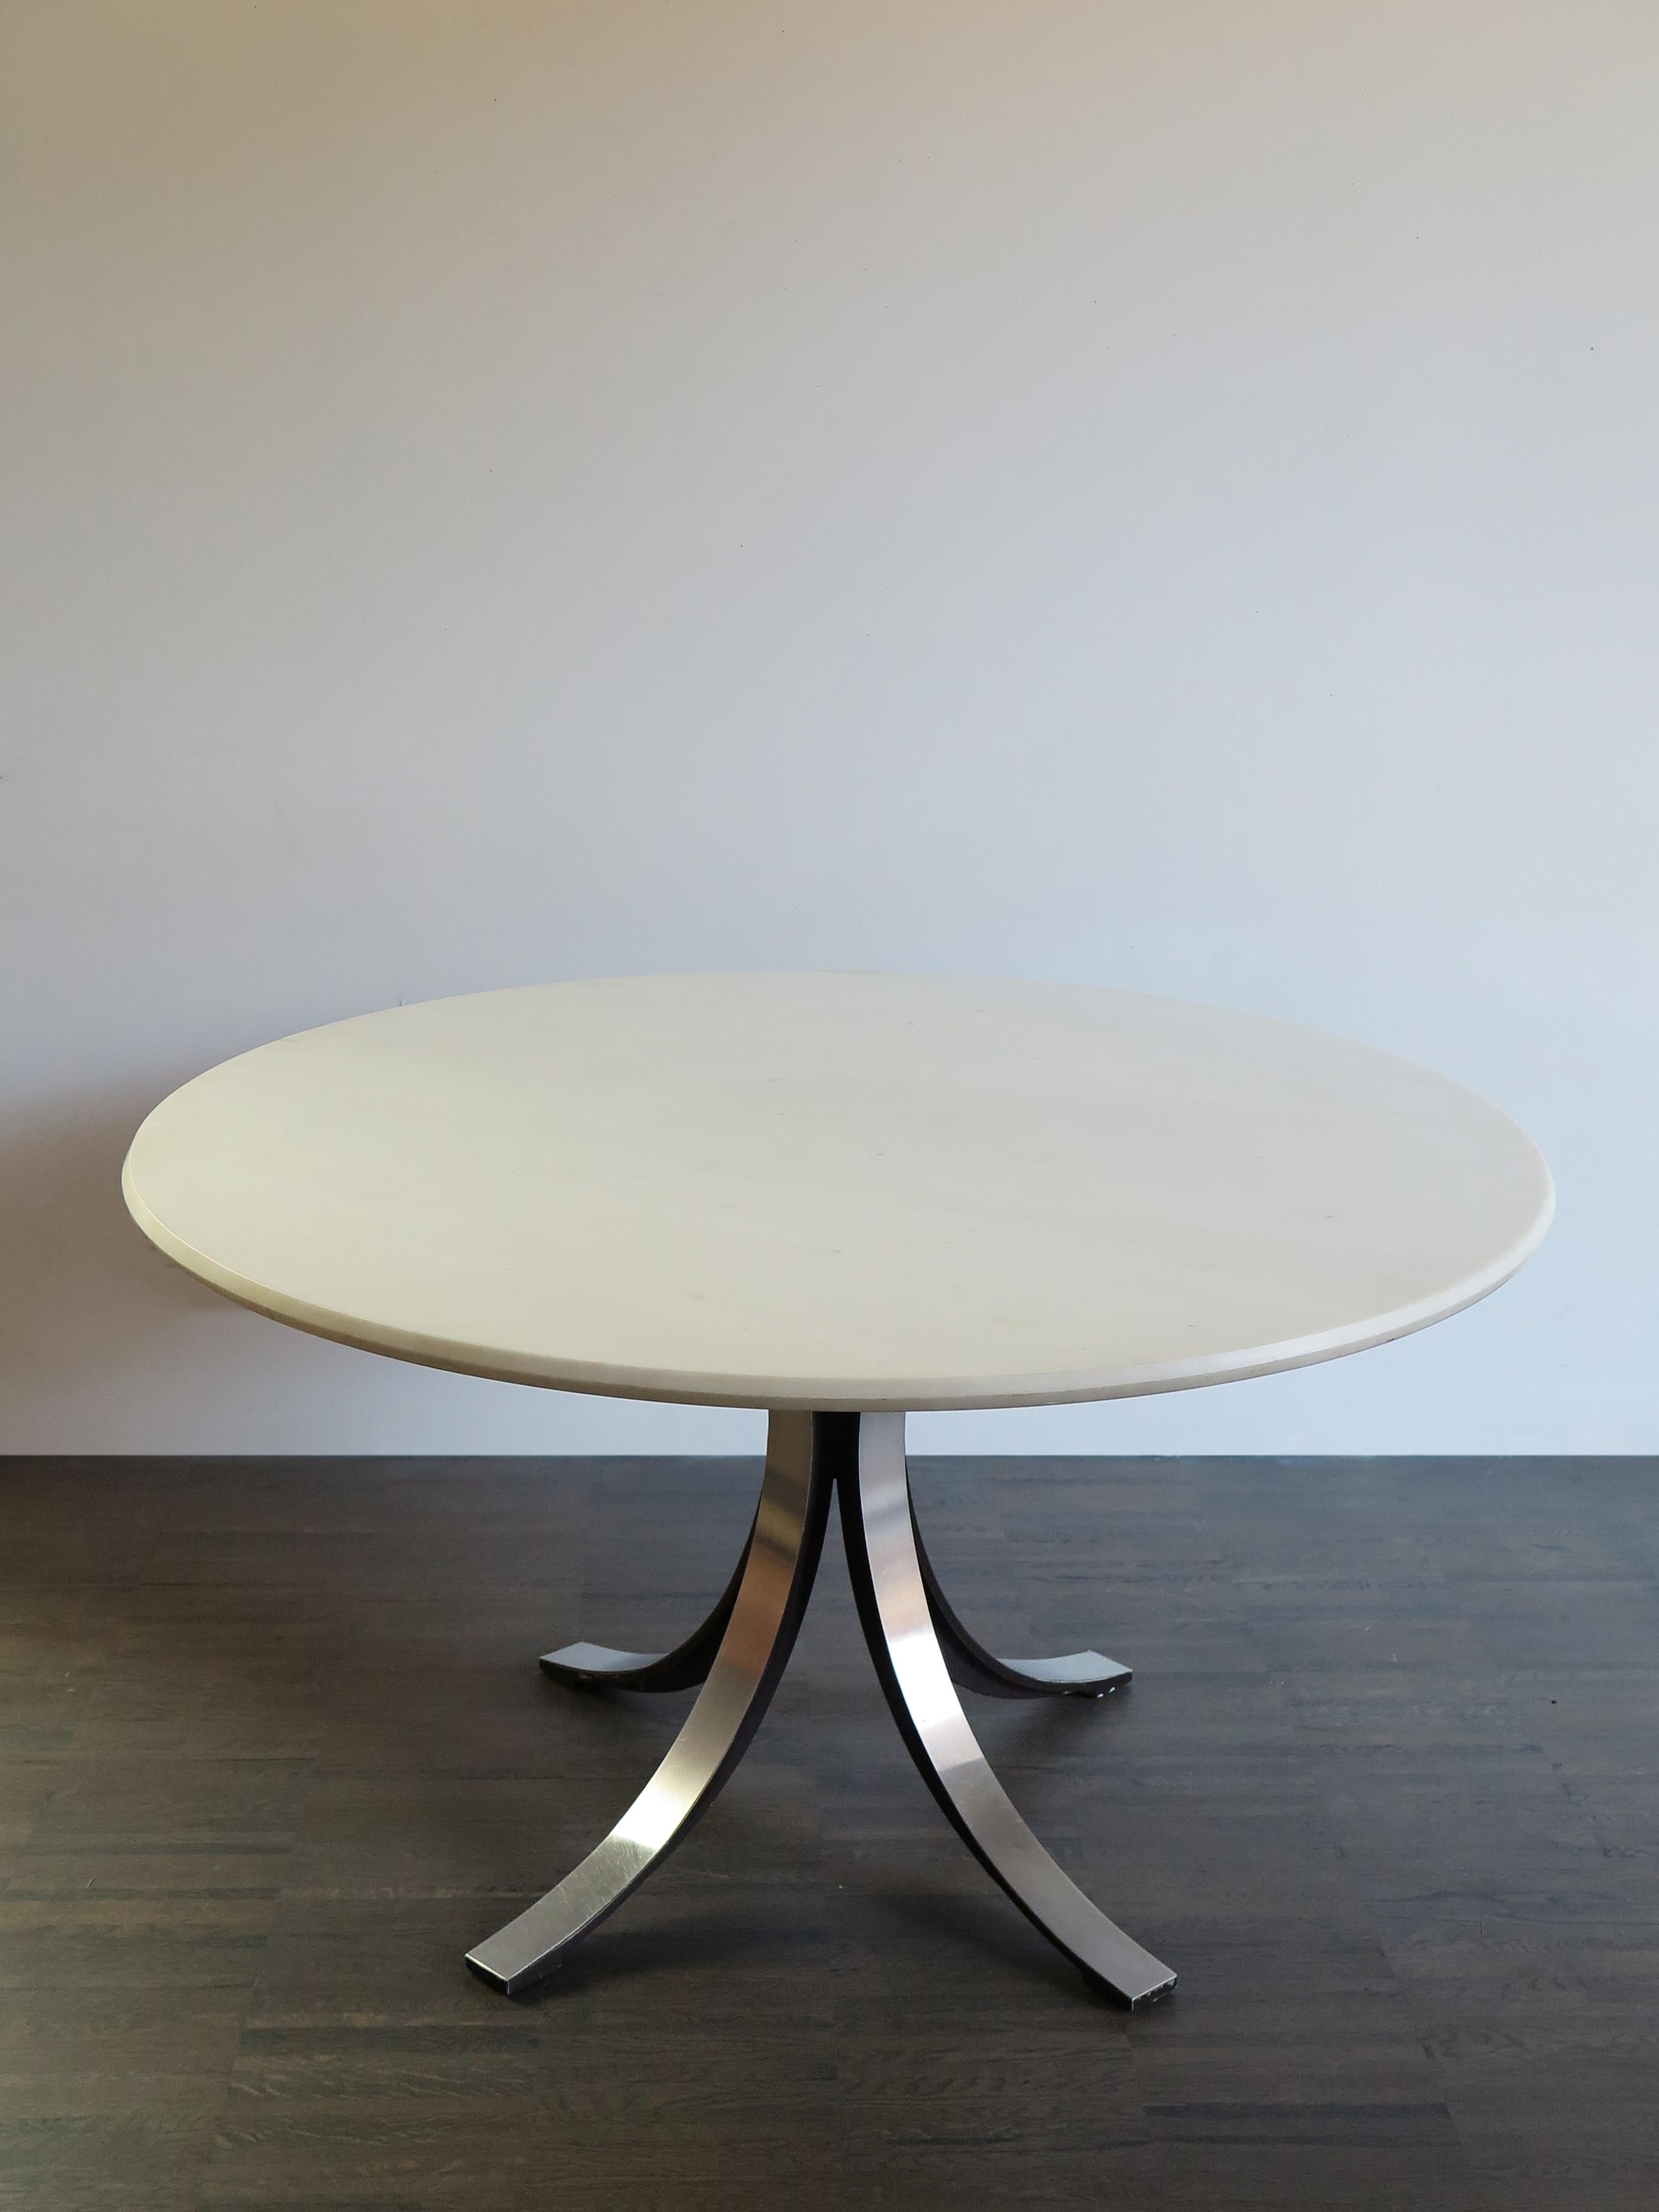 Italian rare and famous circle midcentury modern design dining table model T69 designed by Osvaldo Borsani and Eugenio Gerli for Tecno in 1963 with White Carrara marble-top and with the four famous metal saber feet. Manufacturing